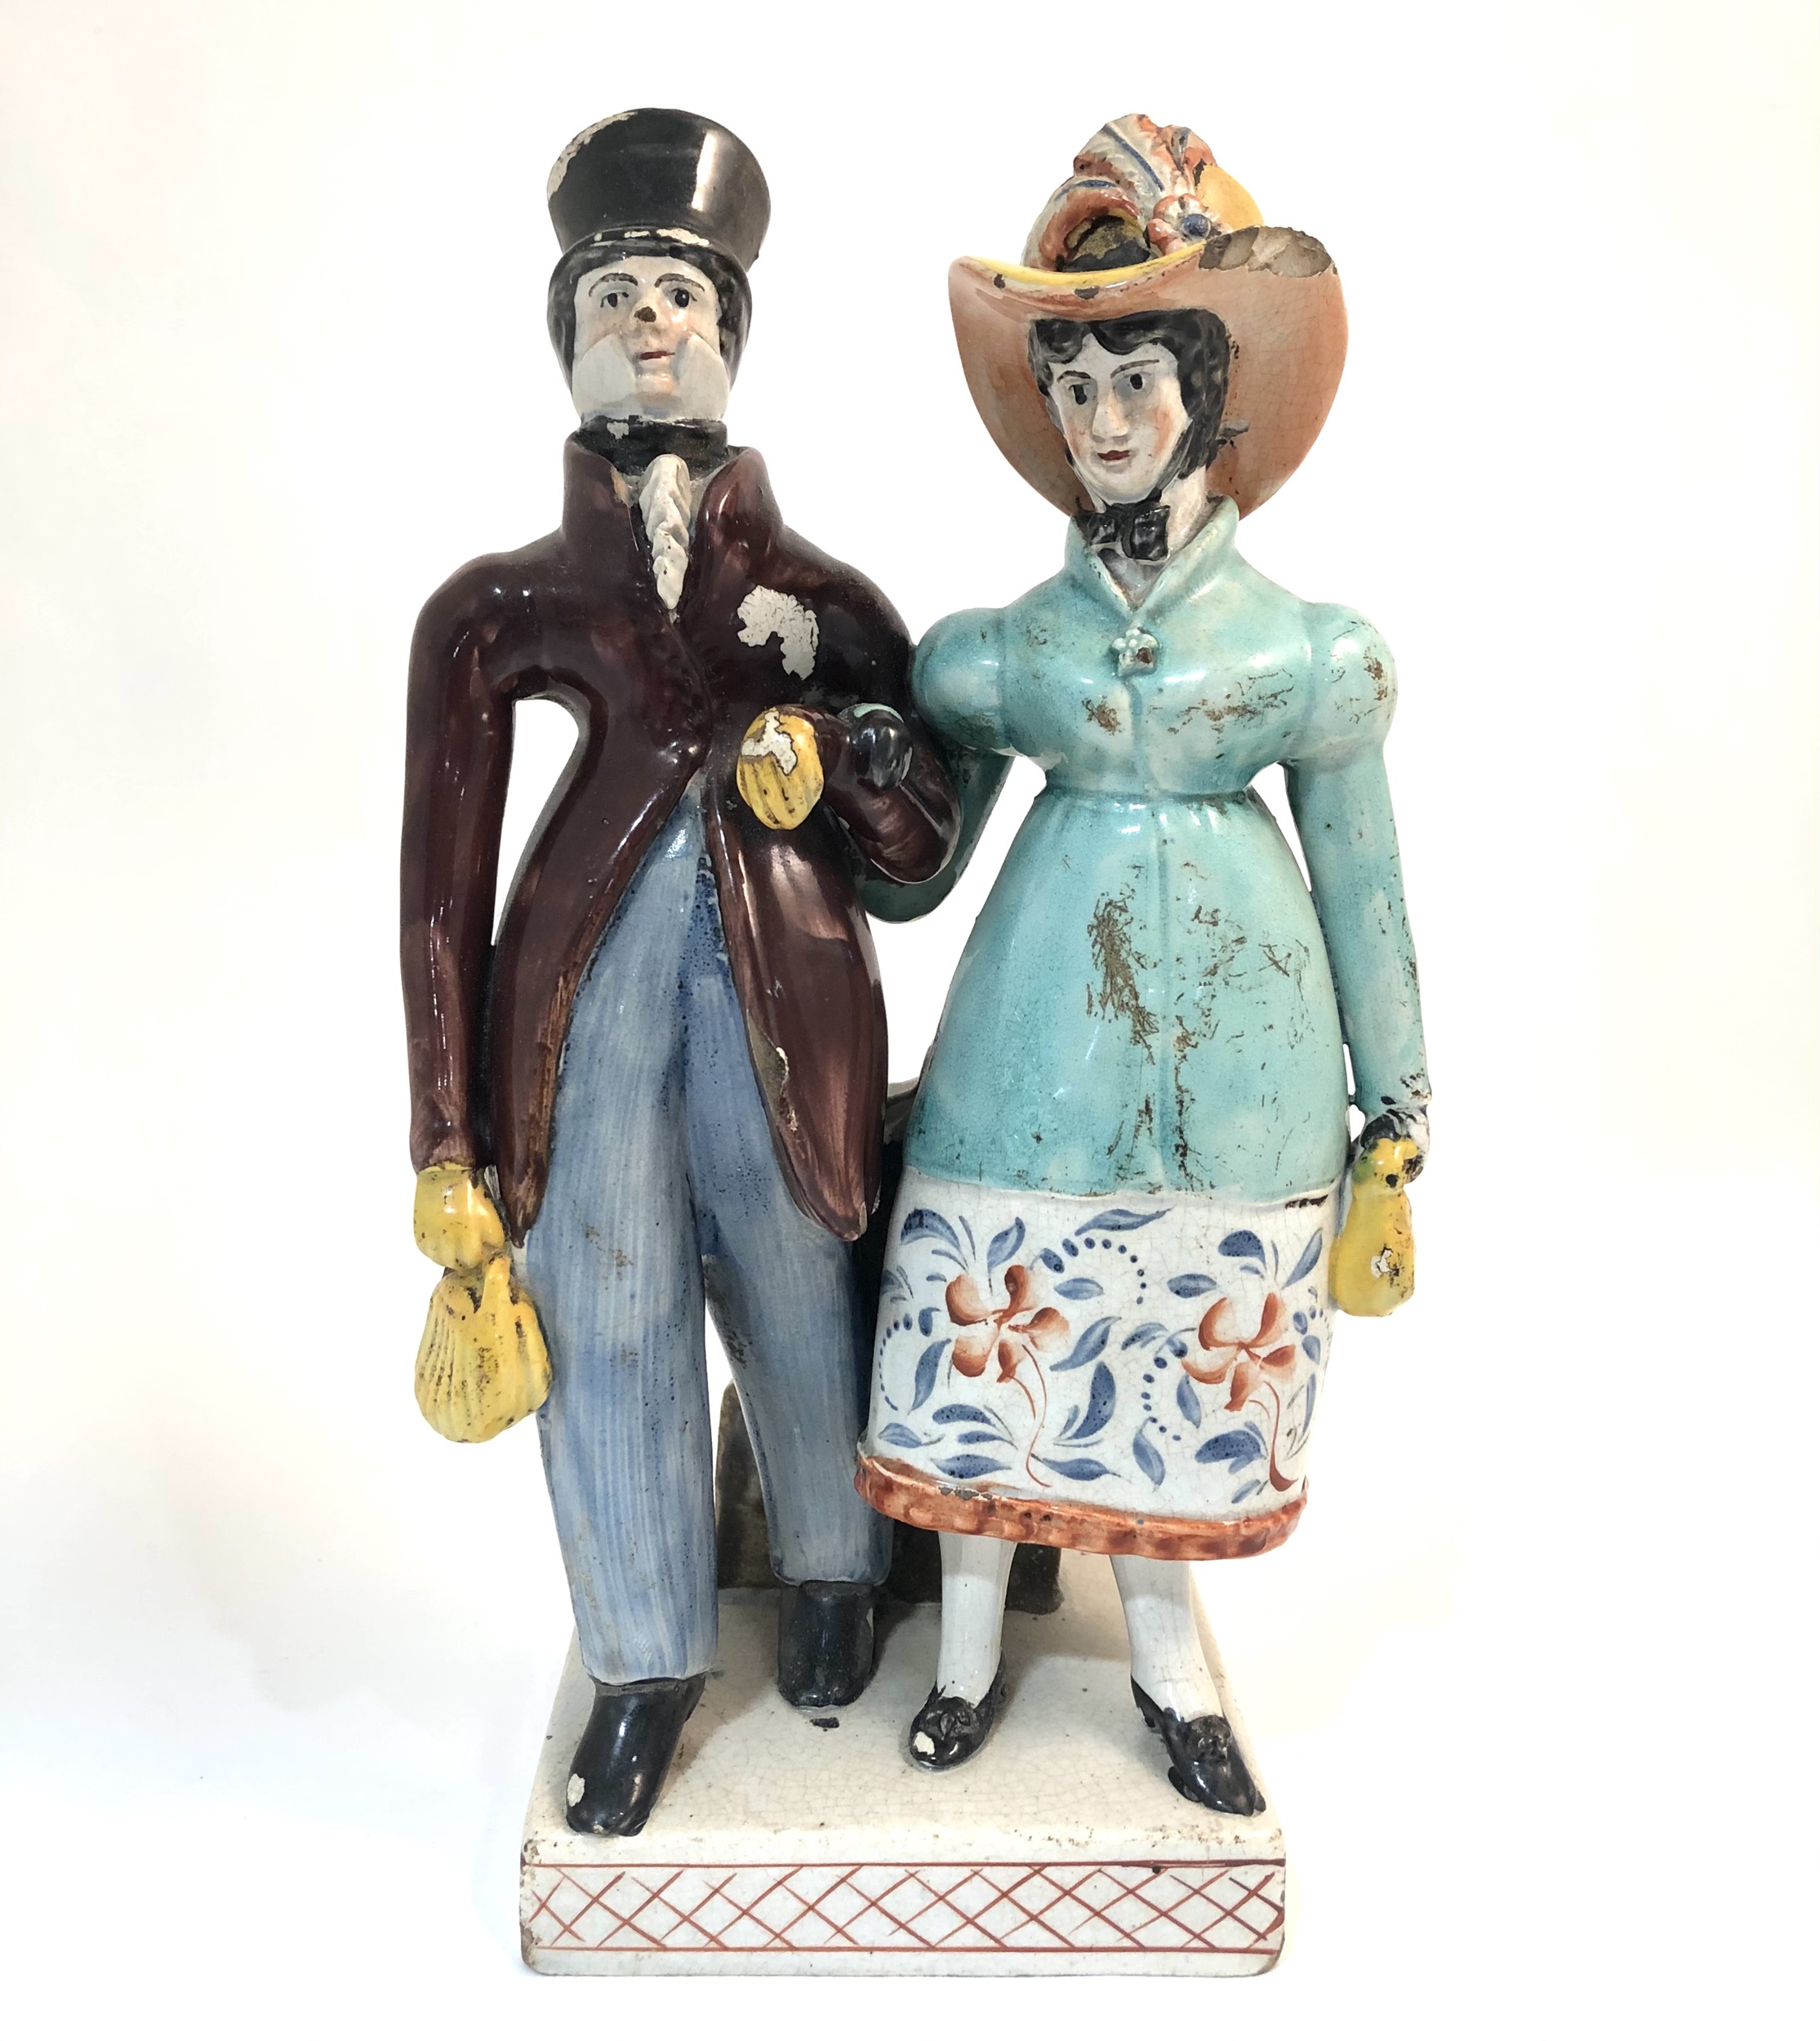 A Staffordshire pearlware group of Dandies, early 19th century.